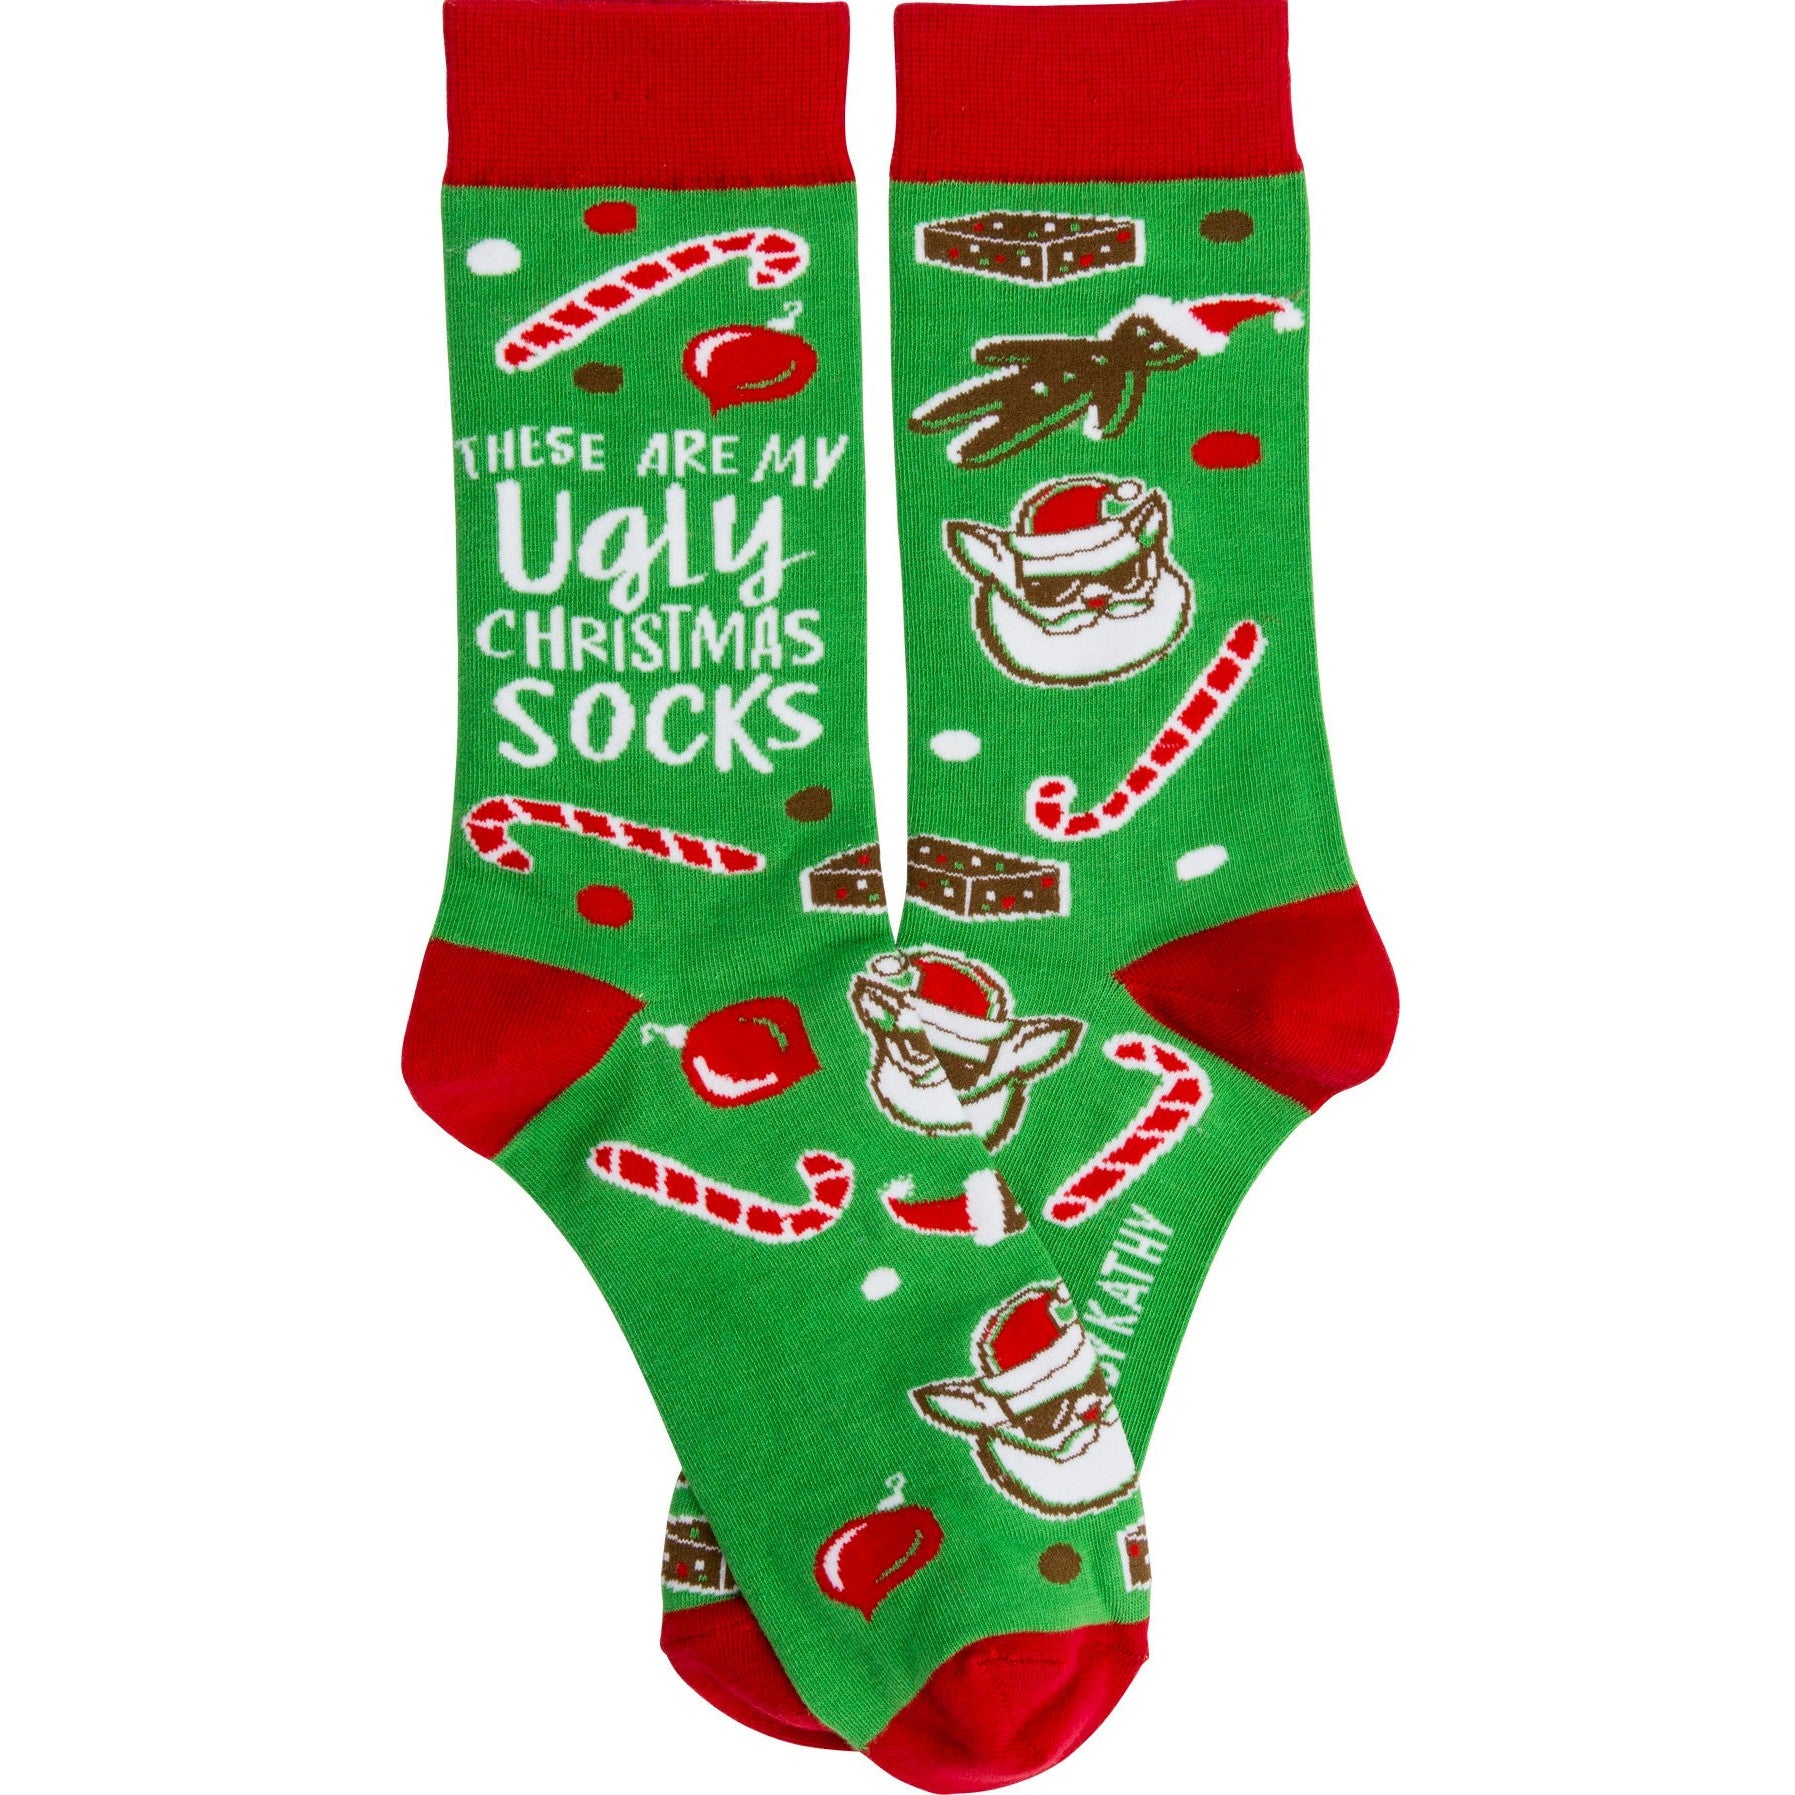 These Are My Ugly Christmas Socks | Funny Novelty Socks with Cool Design | Bold/Crazy/Unique Dress Socks